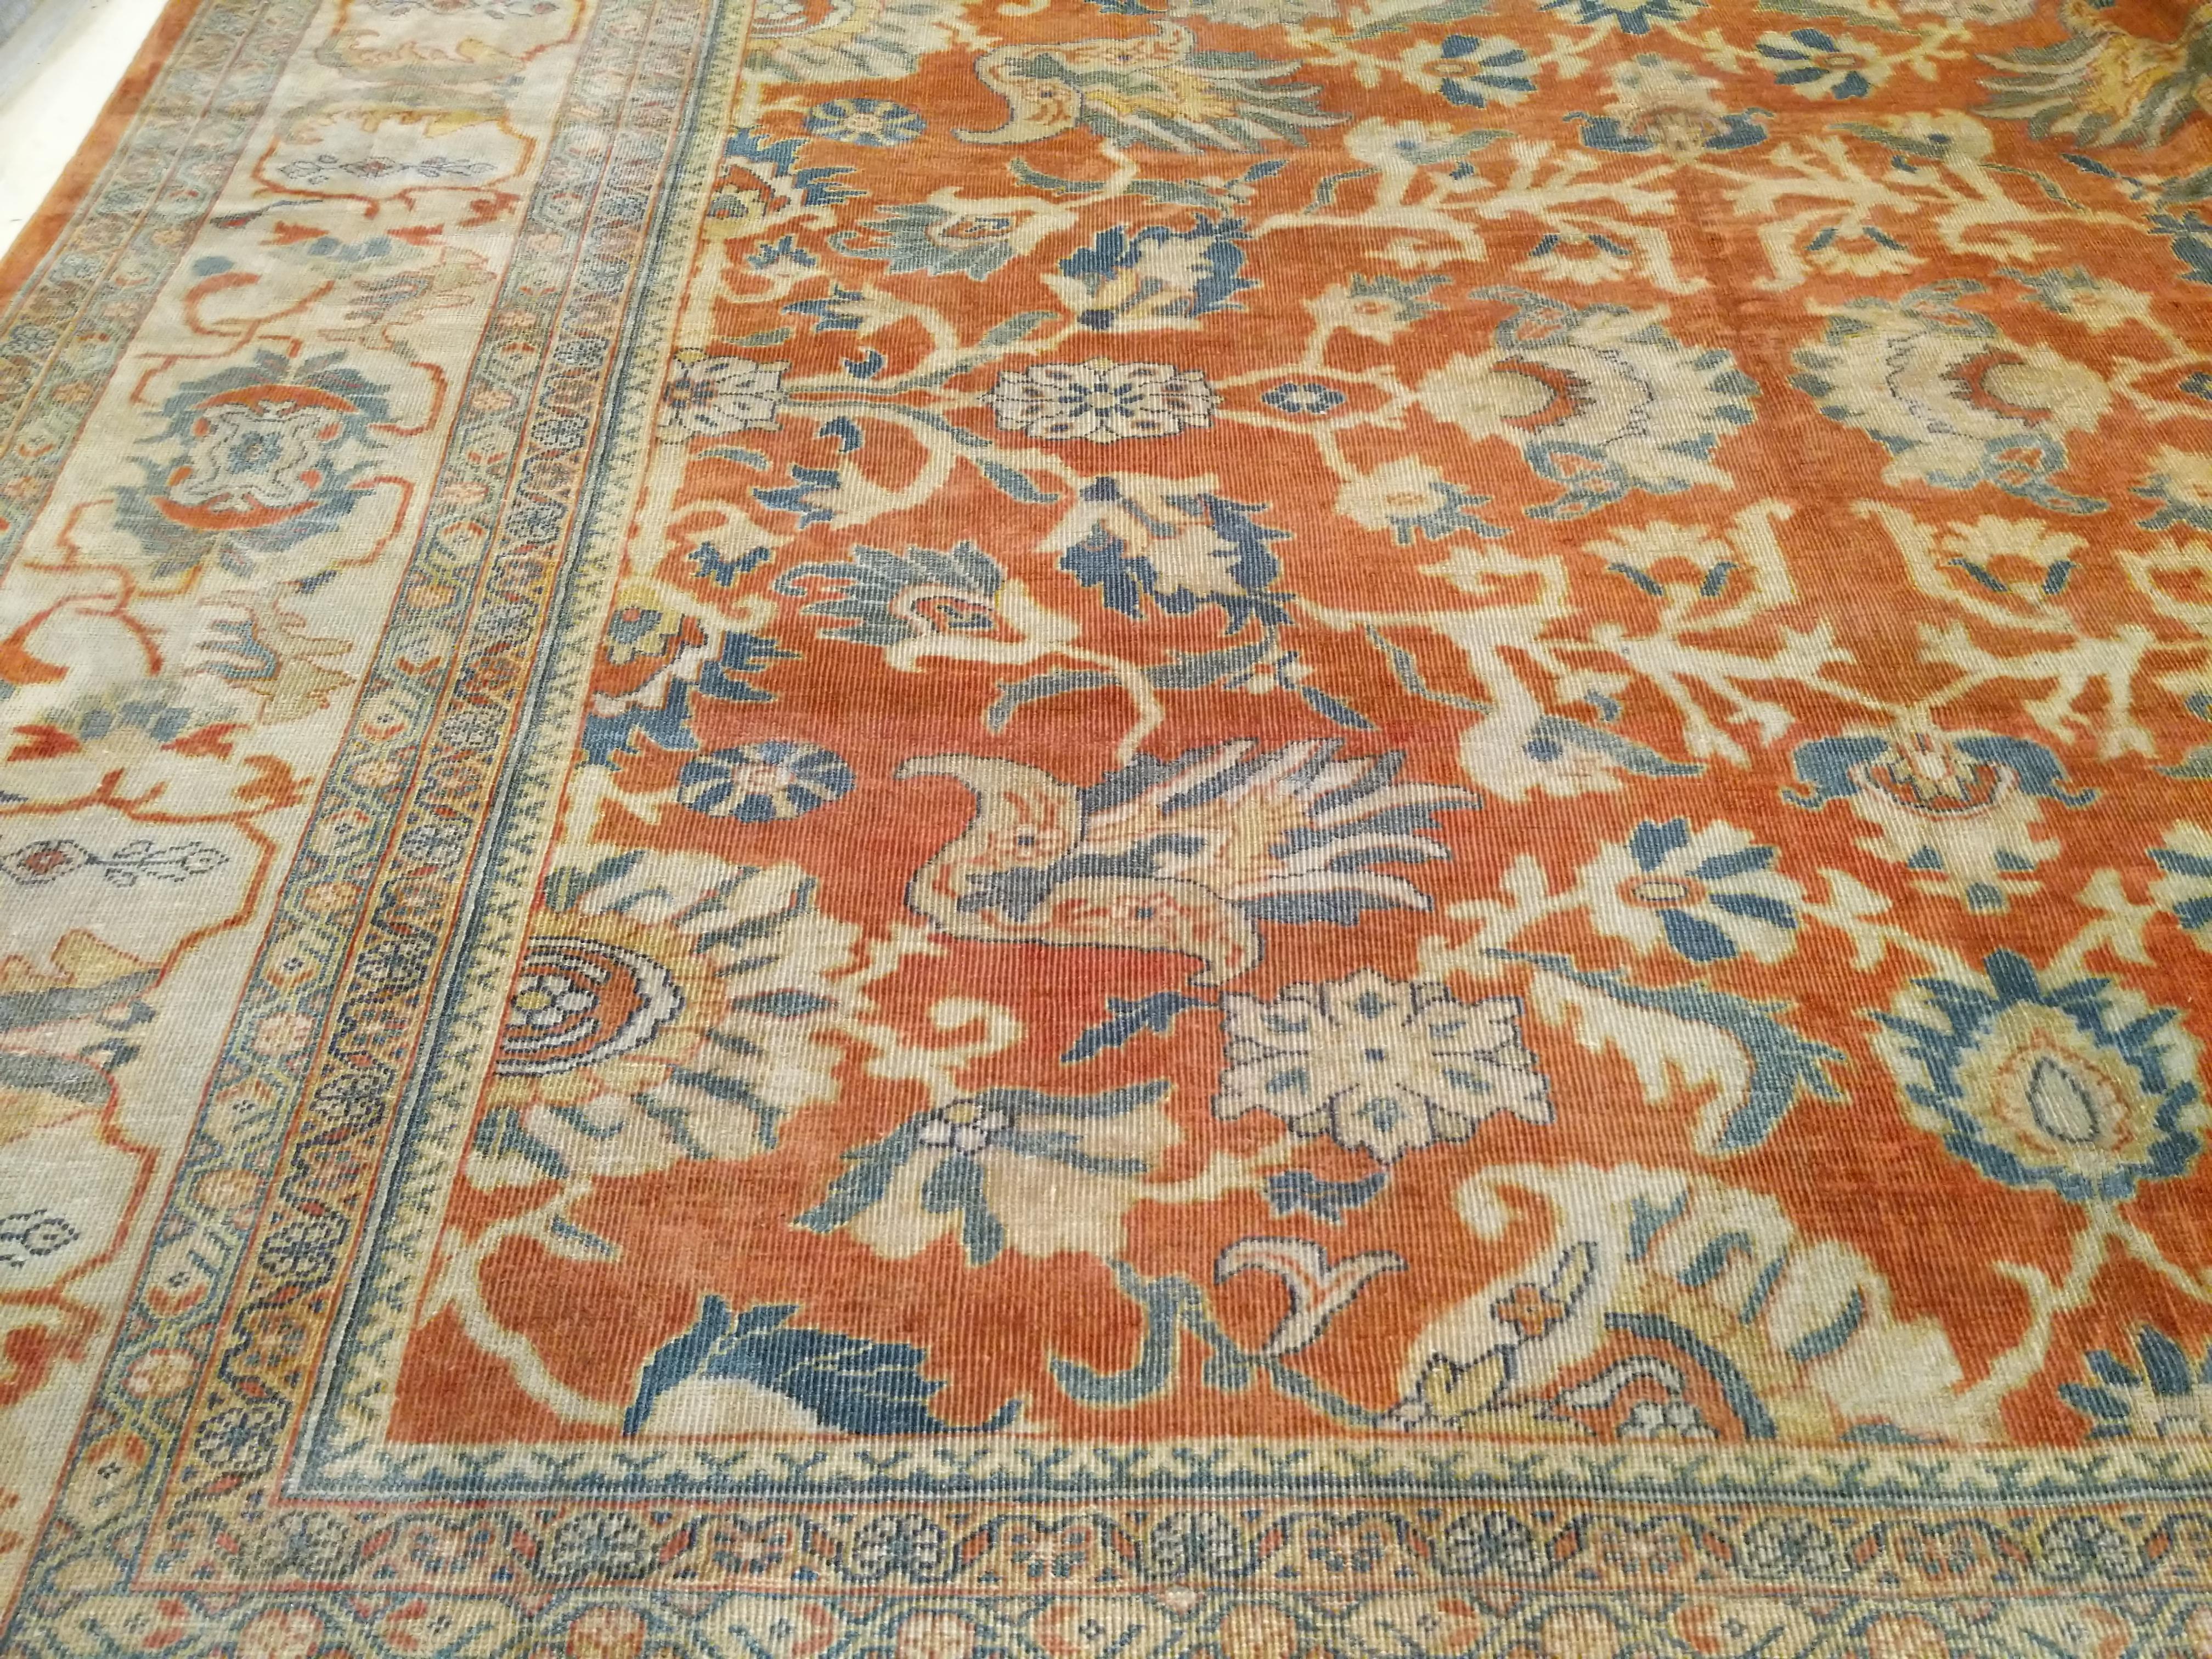 A majestic looking Ziegler style carpet which was commissioned over two decades ago by a client of mine for the living room of his manor. Because it had to match other antique Zieglers in his collection, much effort was put in order to reproduce the